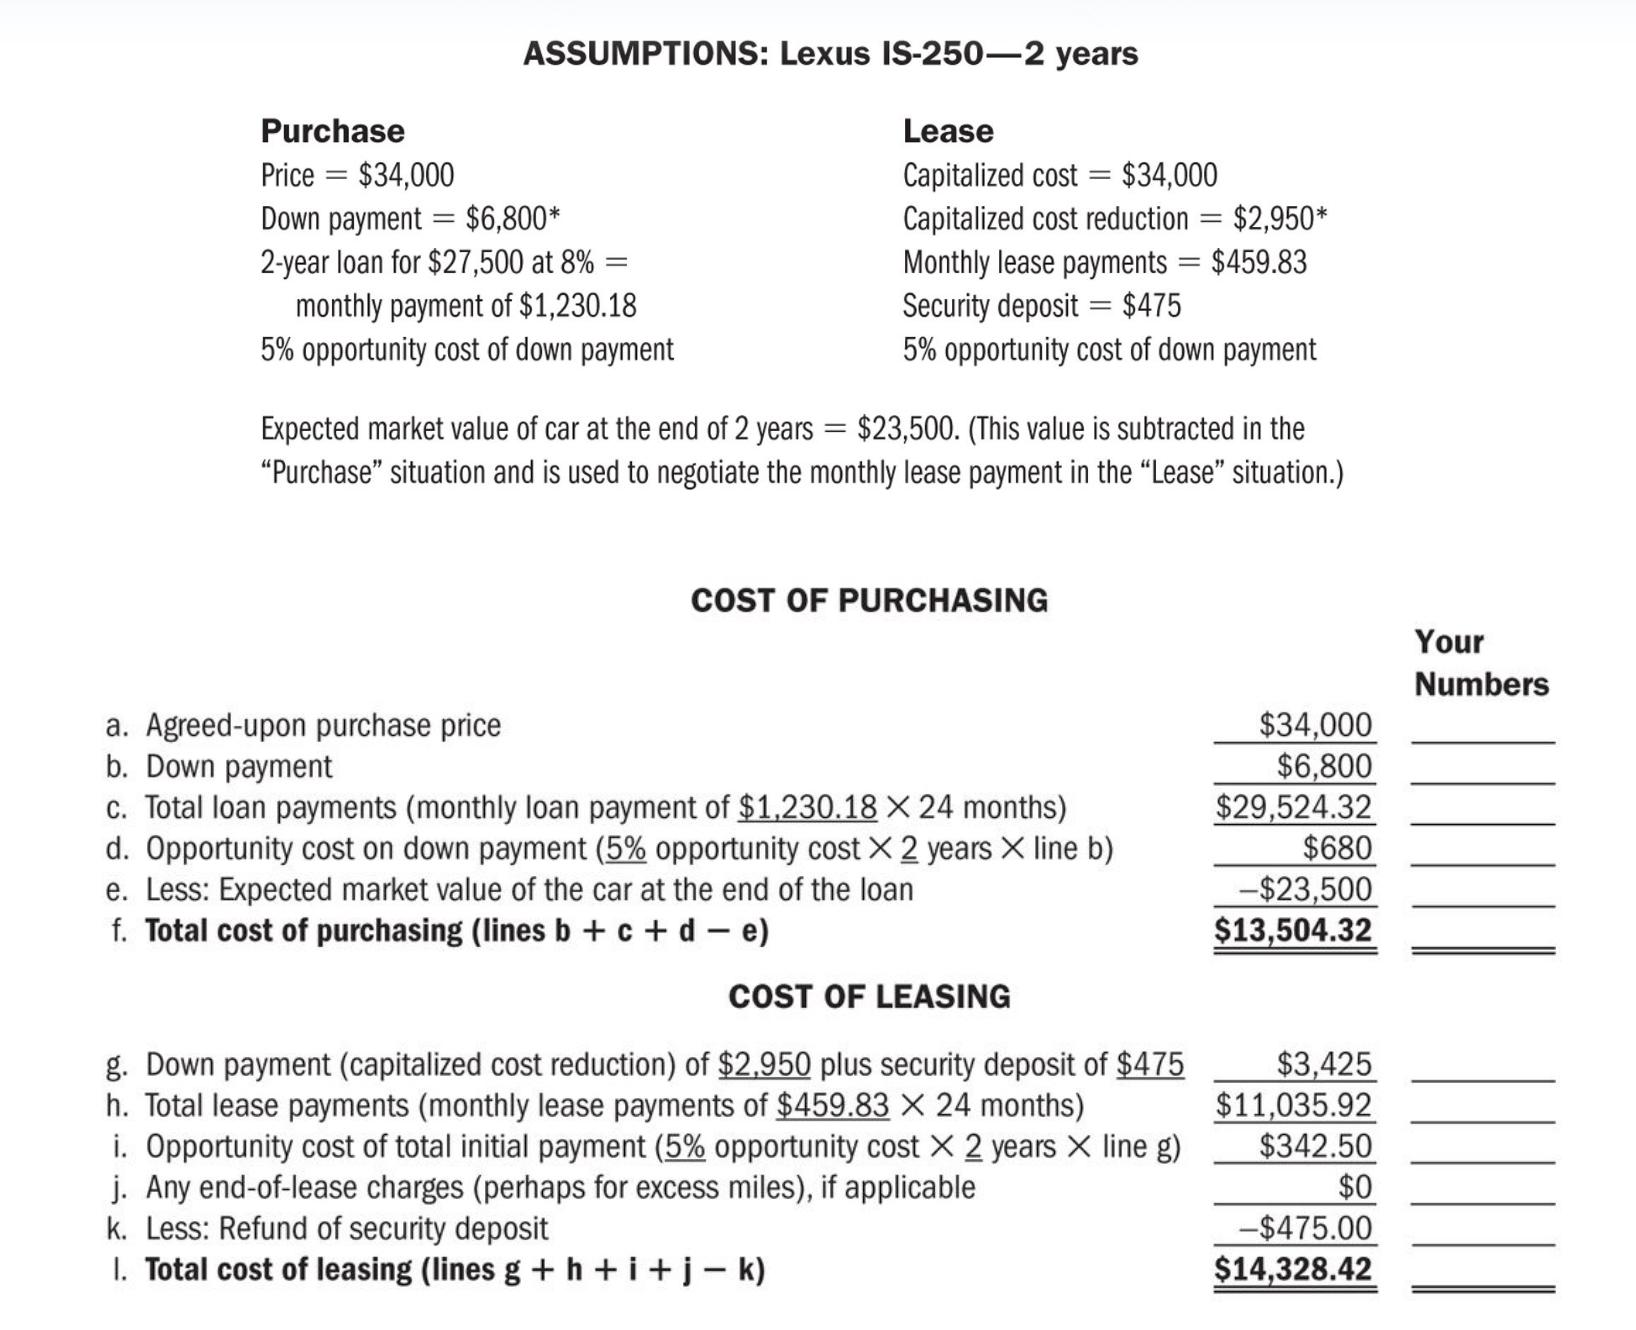 ASSUMPTIONS: Lexus IS-250-2 years Purchase Price = $34,000 Down payment = $6,800* - 2-year loan for $27,500